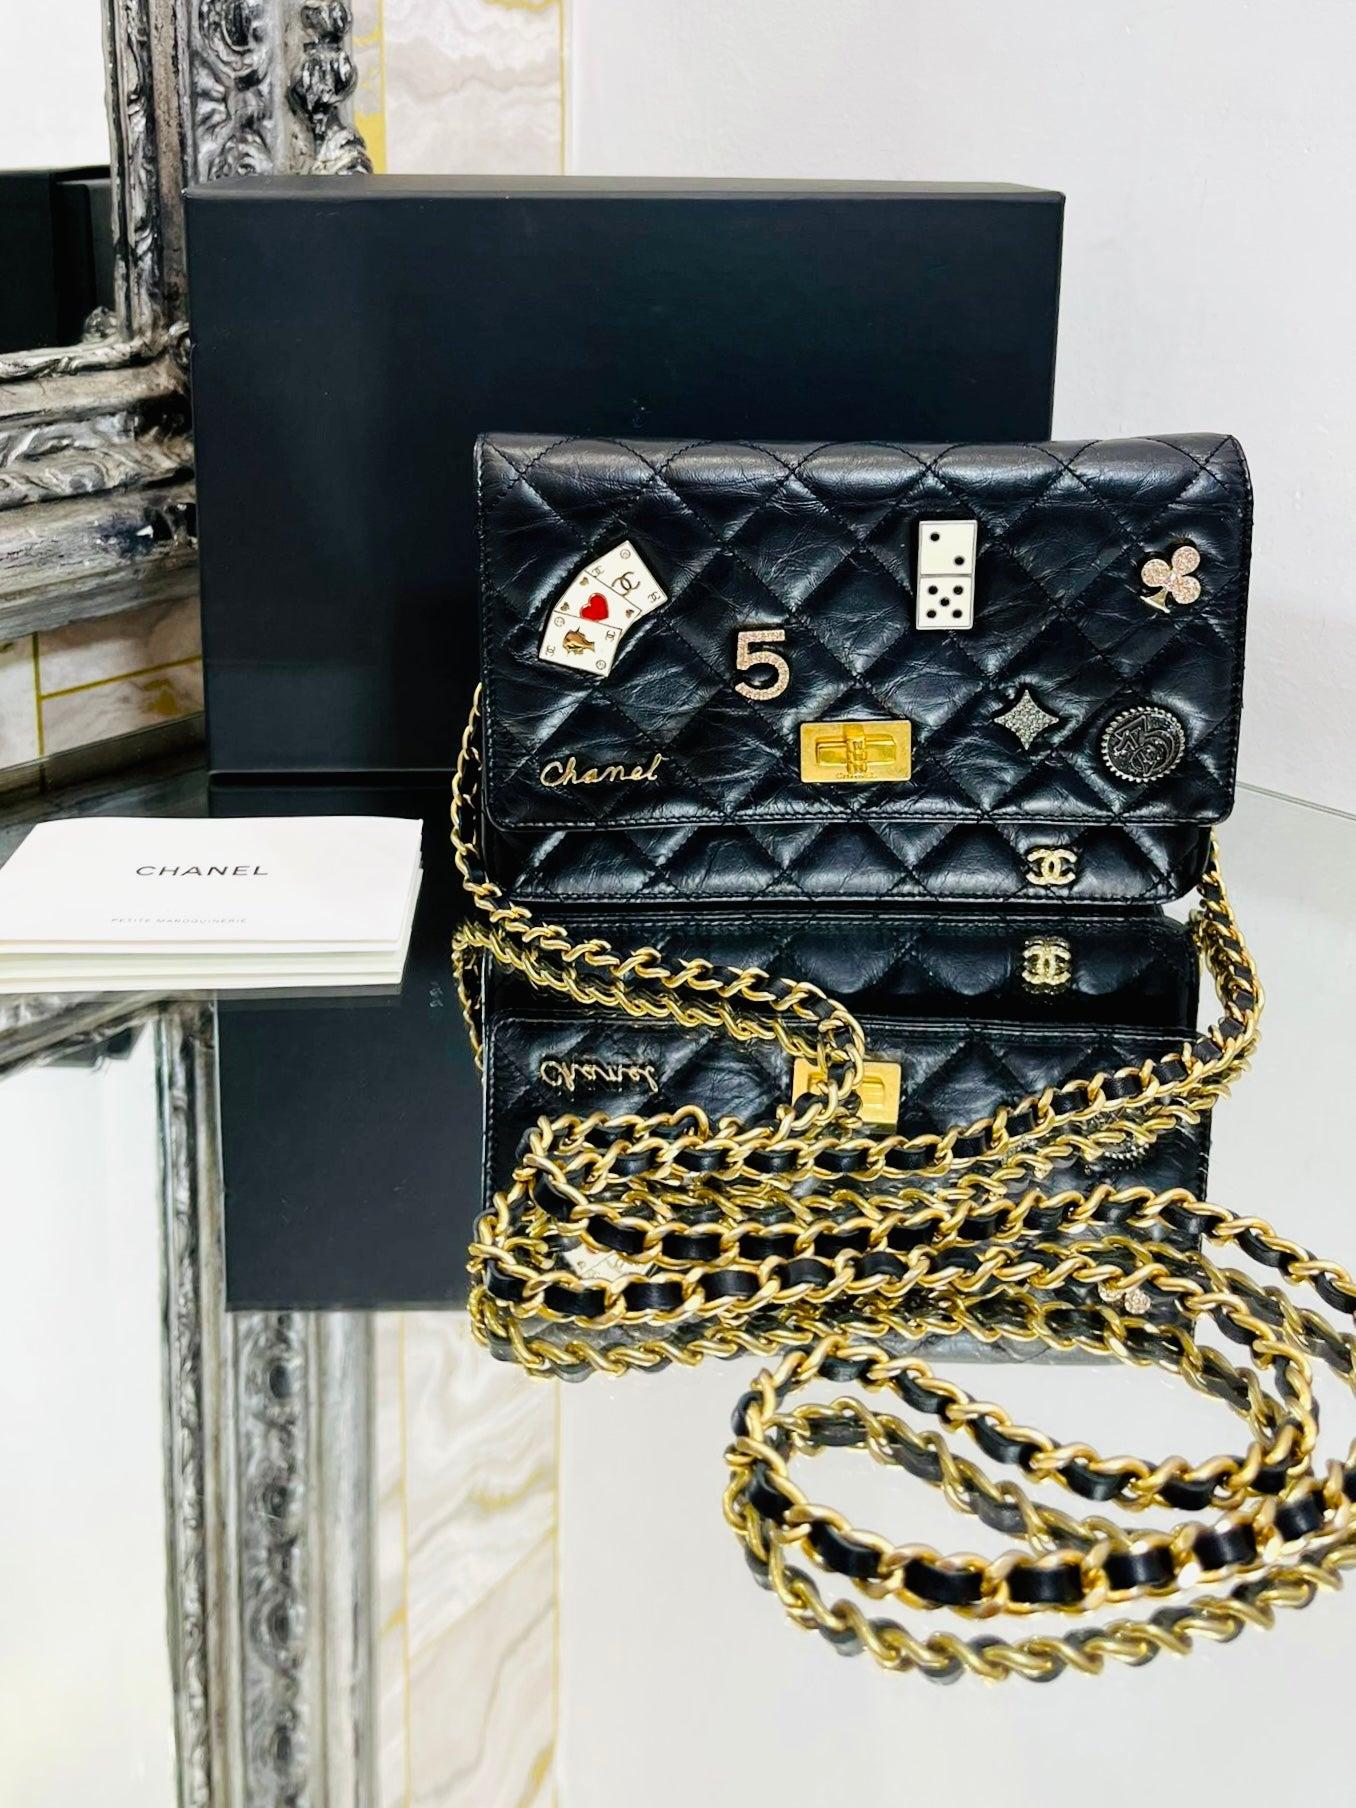 Chanel Reissue Casino Lucky Charms Wallet On A Chain 

Black, quilted, aged, leather with Casino styled and 'CC' logo

badges/charms to the front. Gold hardware and leather and chain

crossbody strap. From 2016 Collection.

Size - Height 13cm, Width